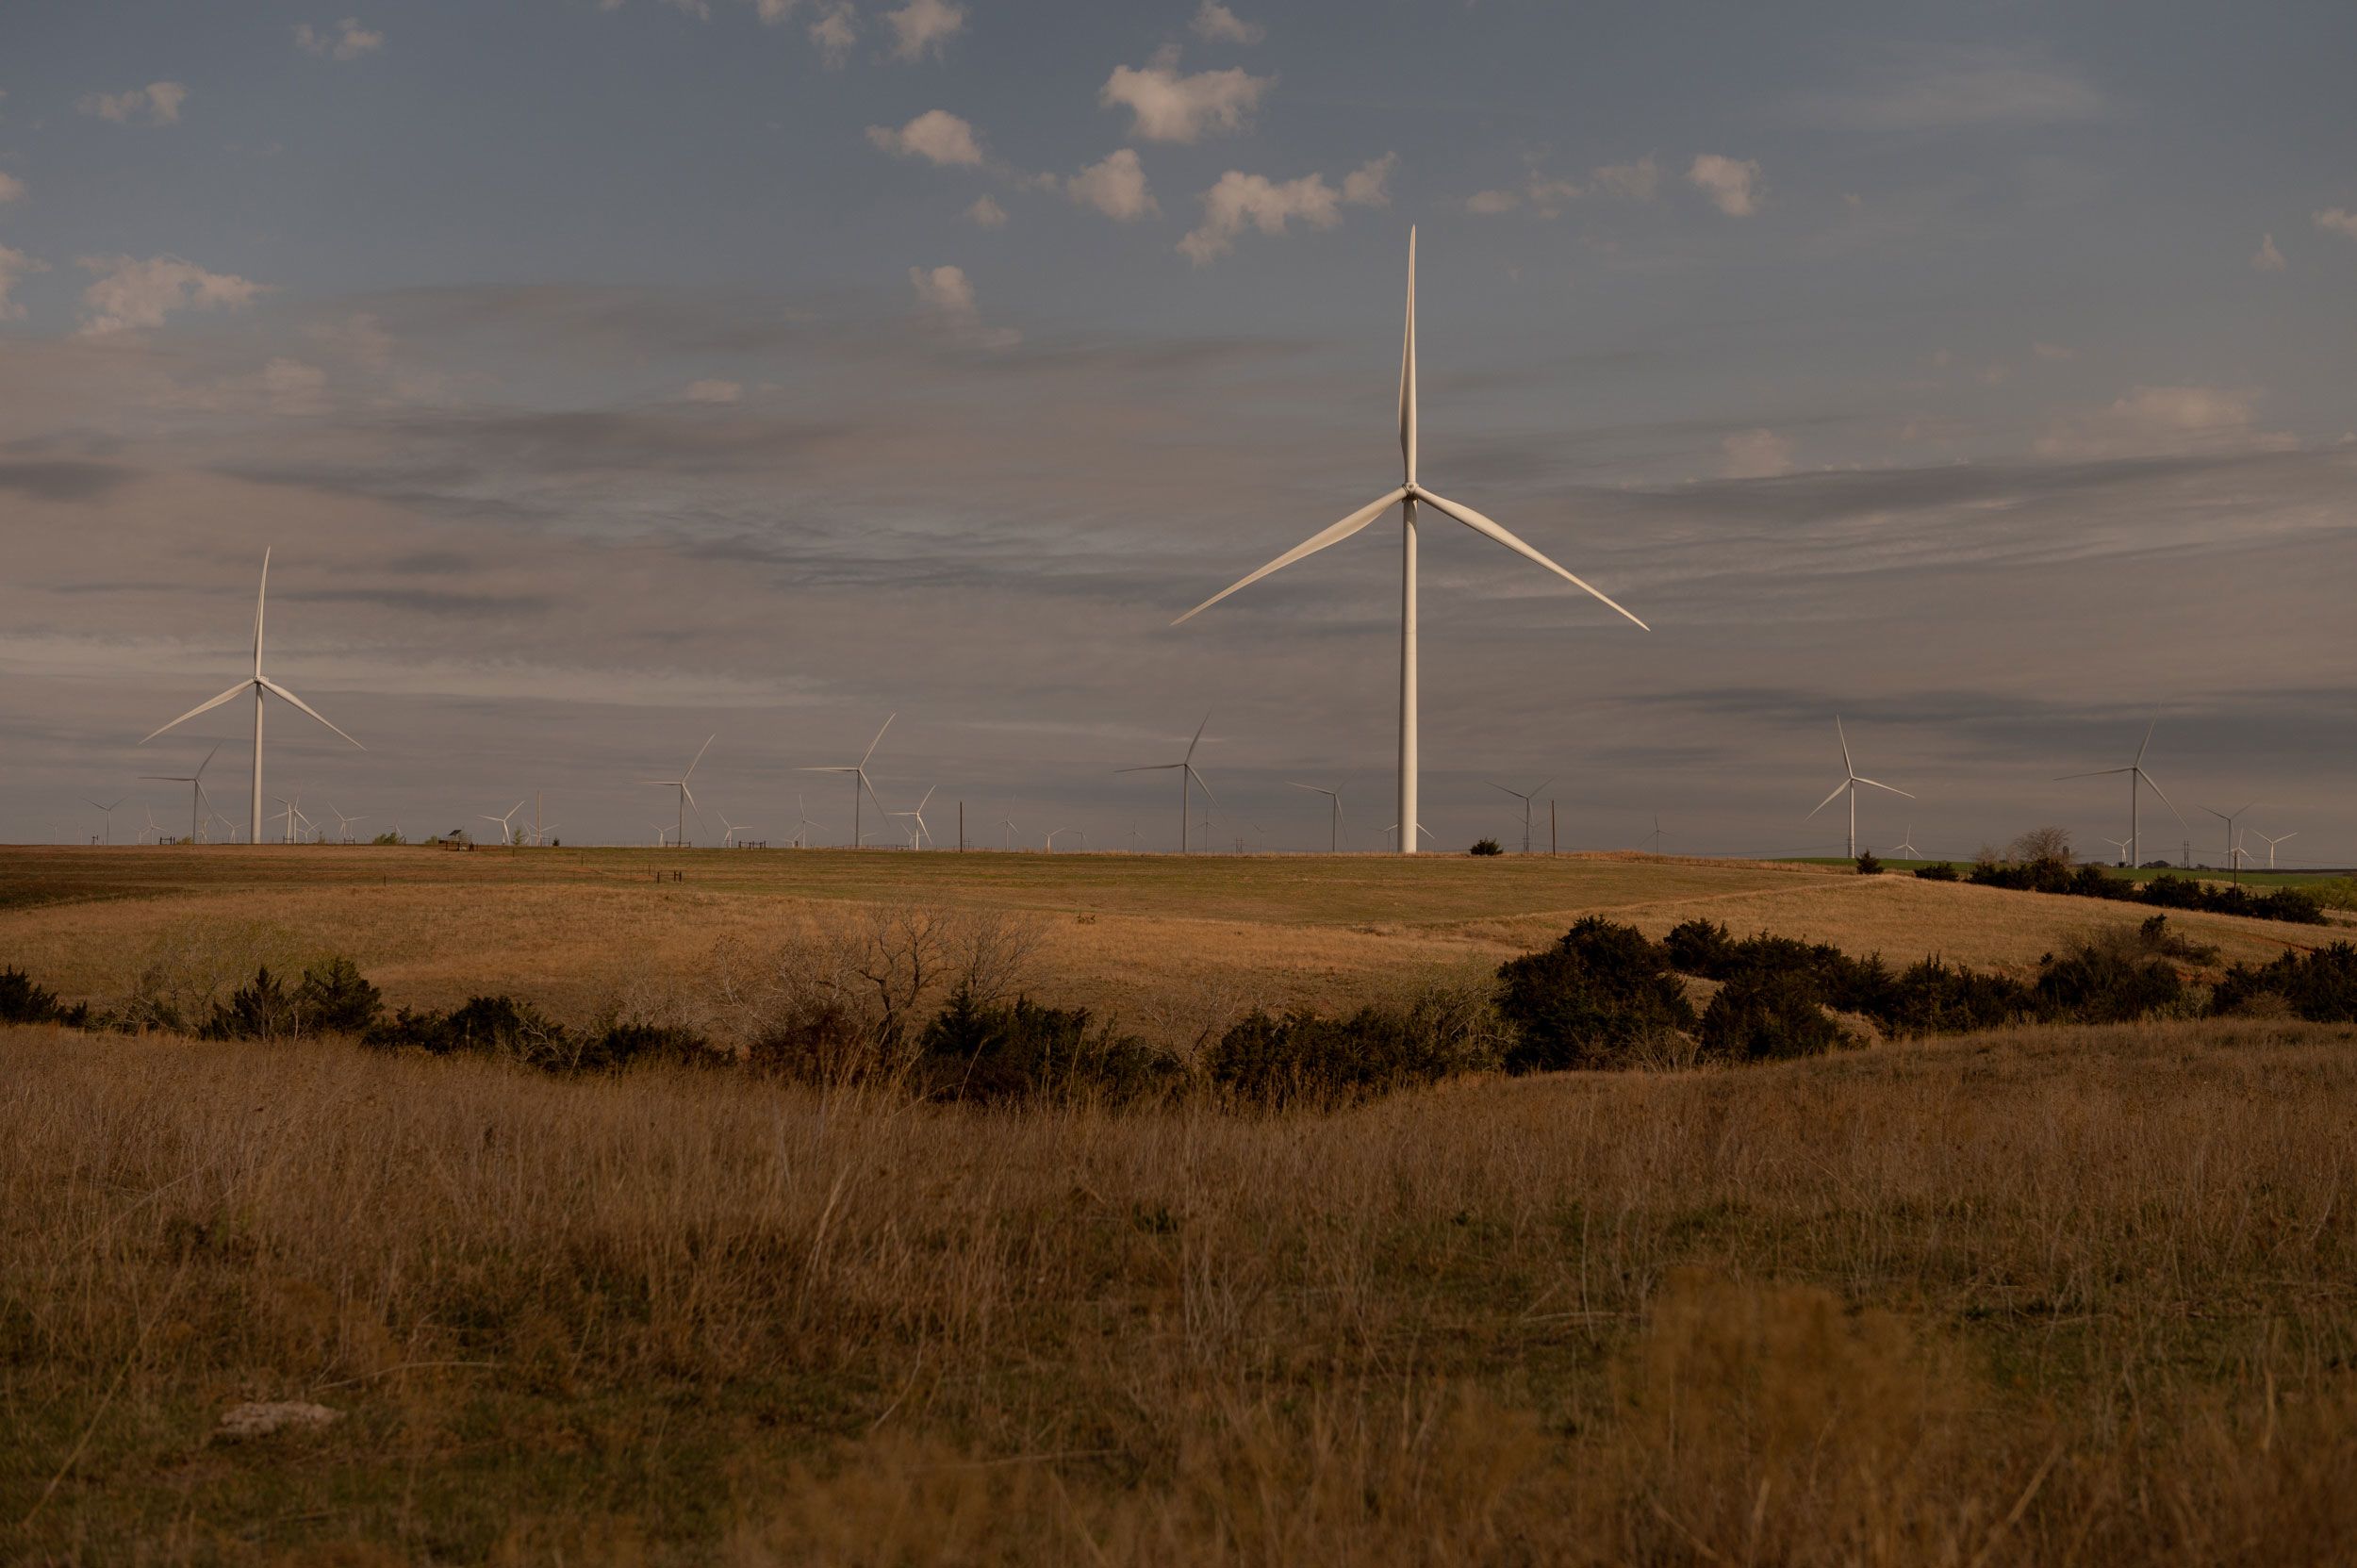 Wind turbines have little to no impact on property values, study finds